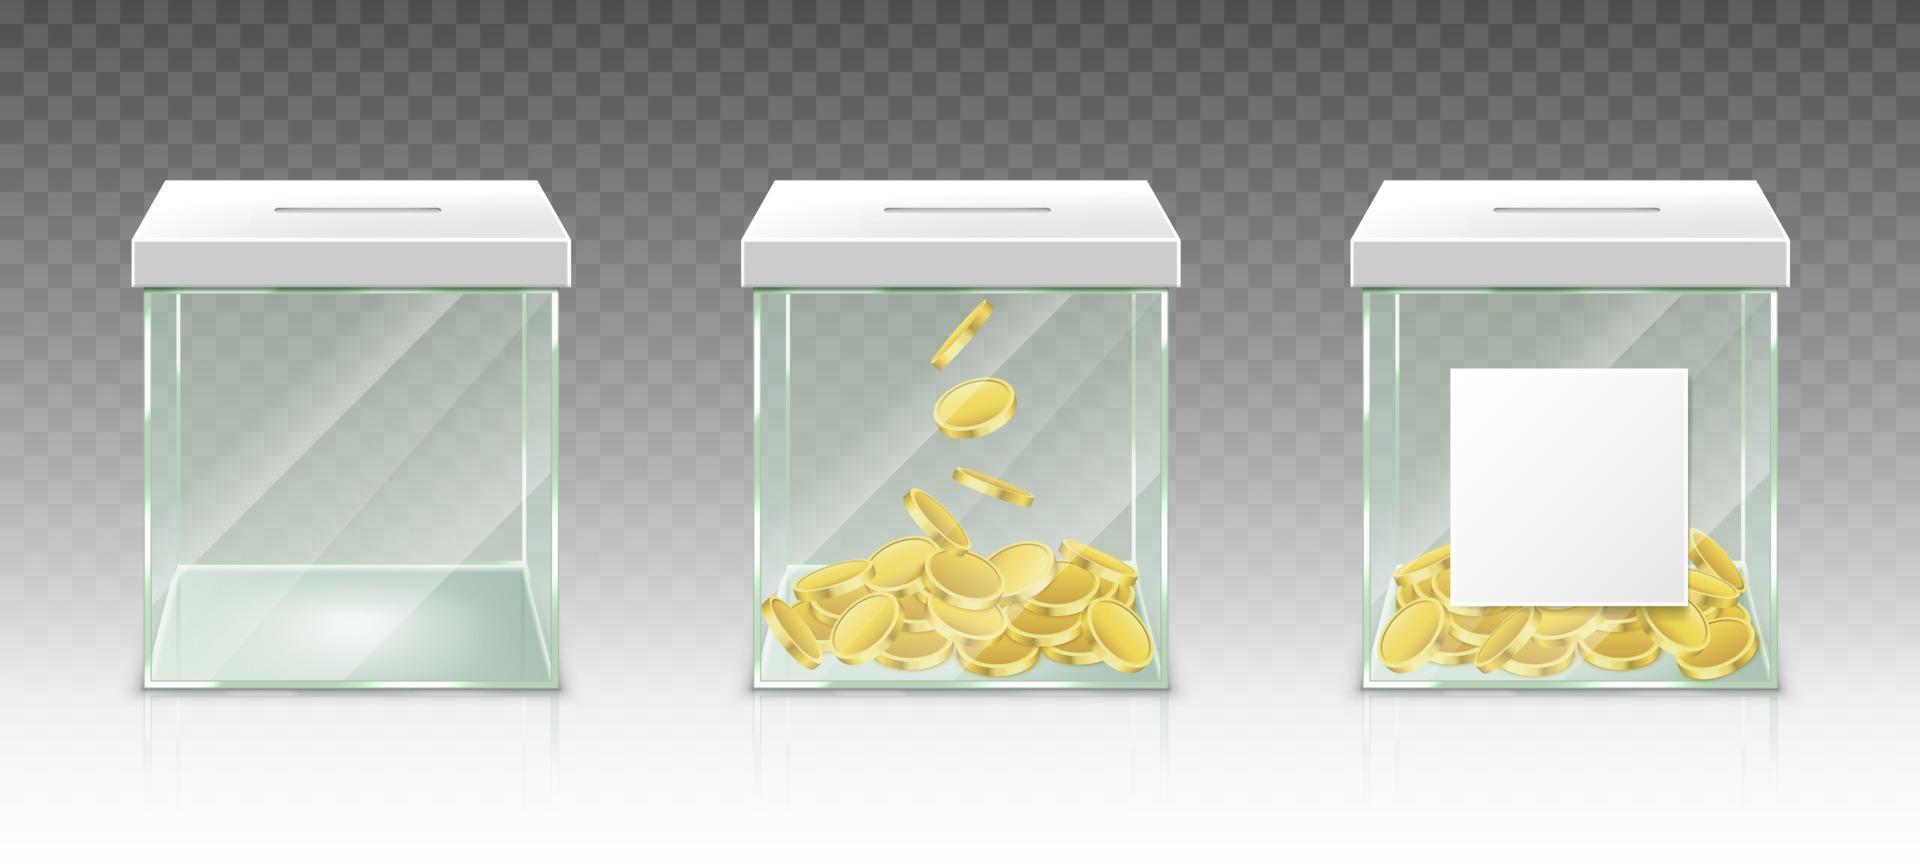 Glass money box for tips, savings or donations vector